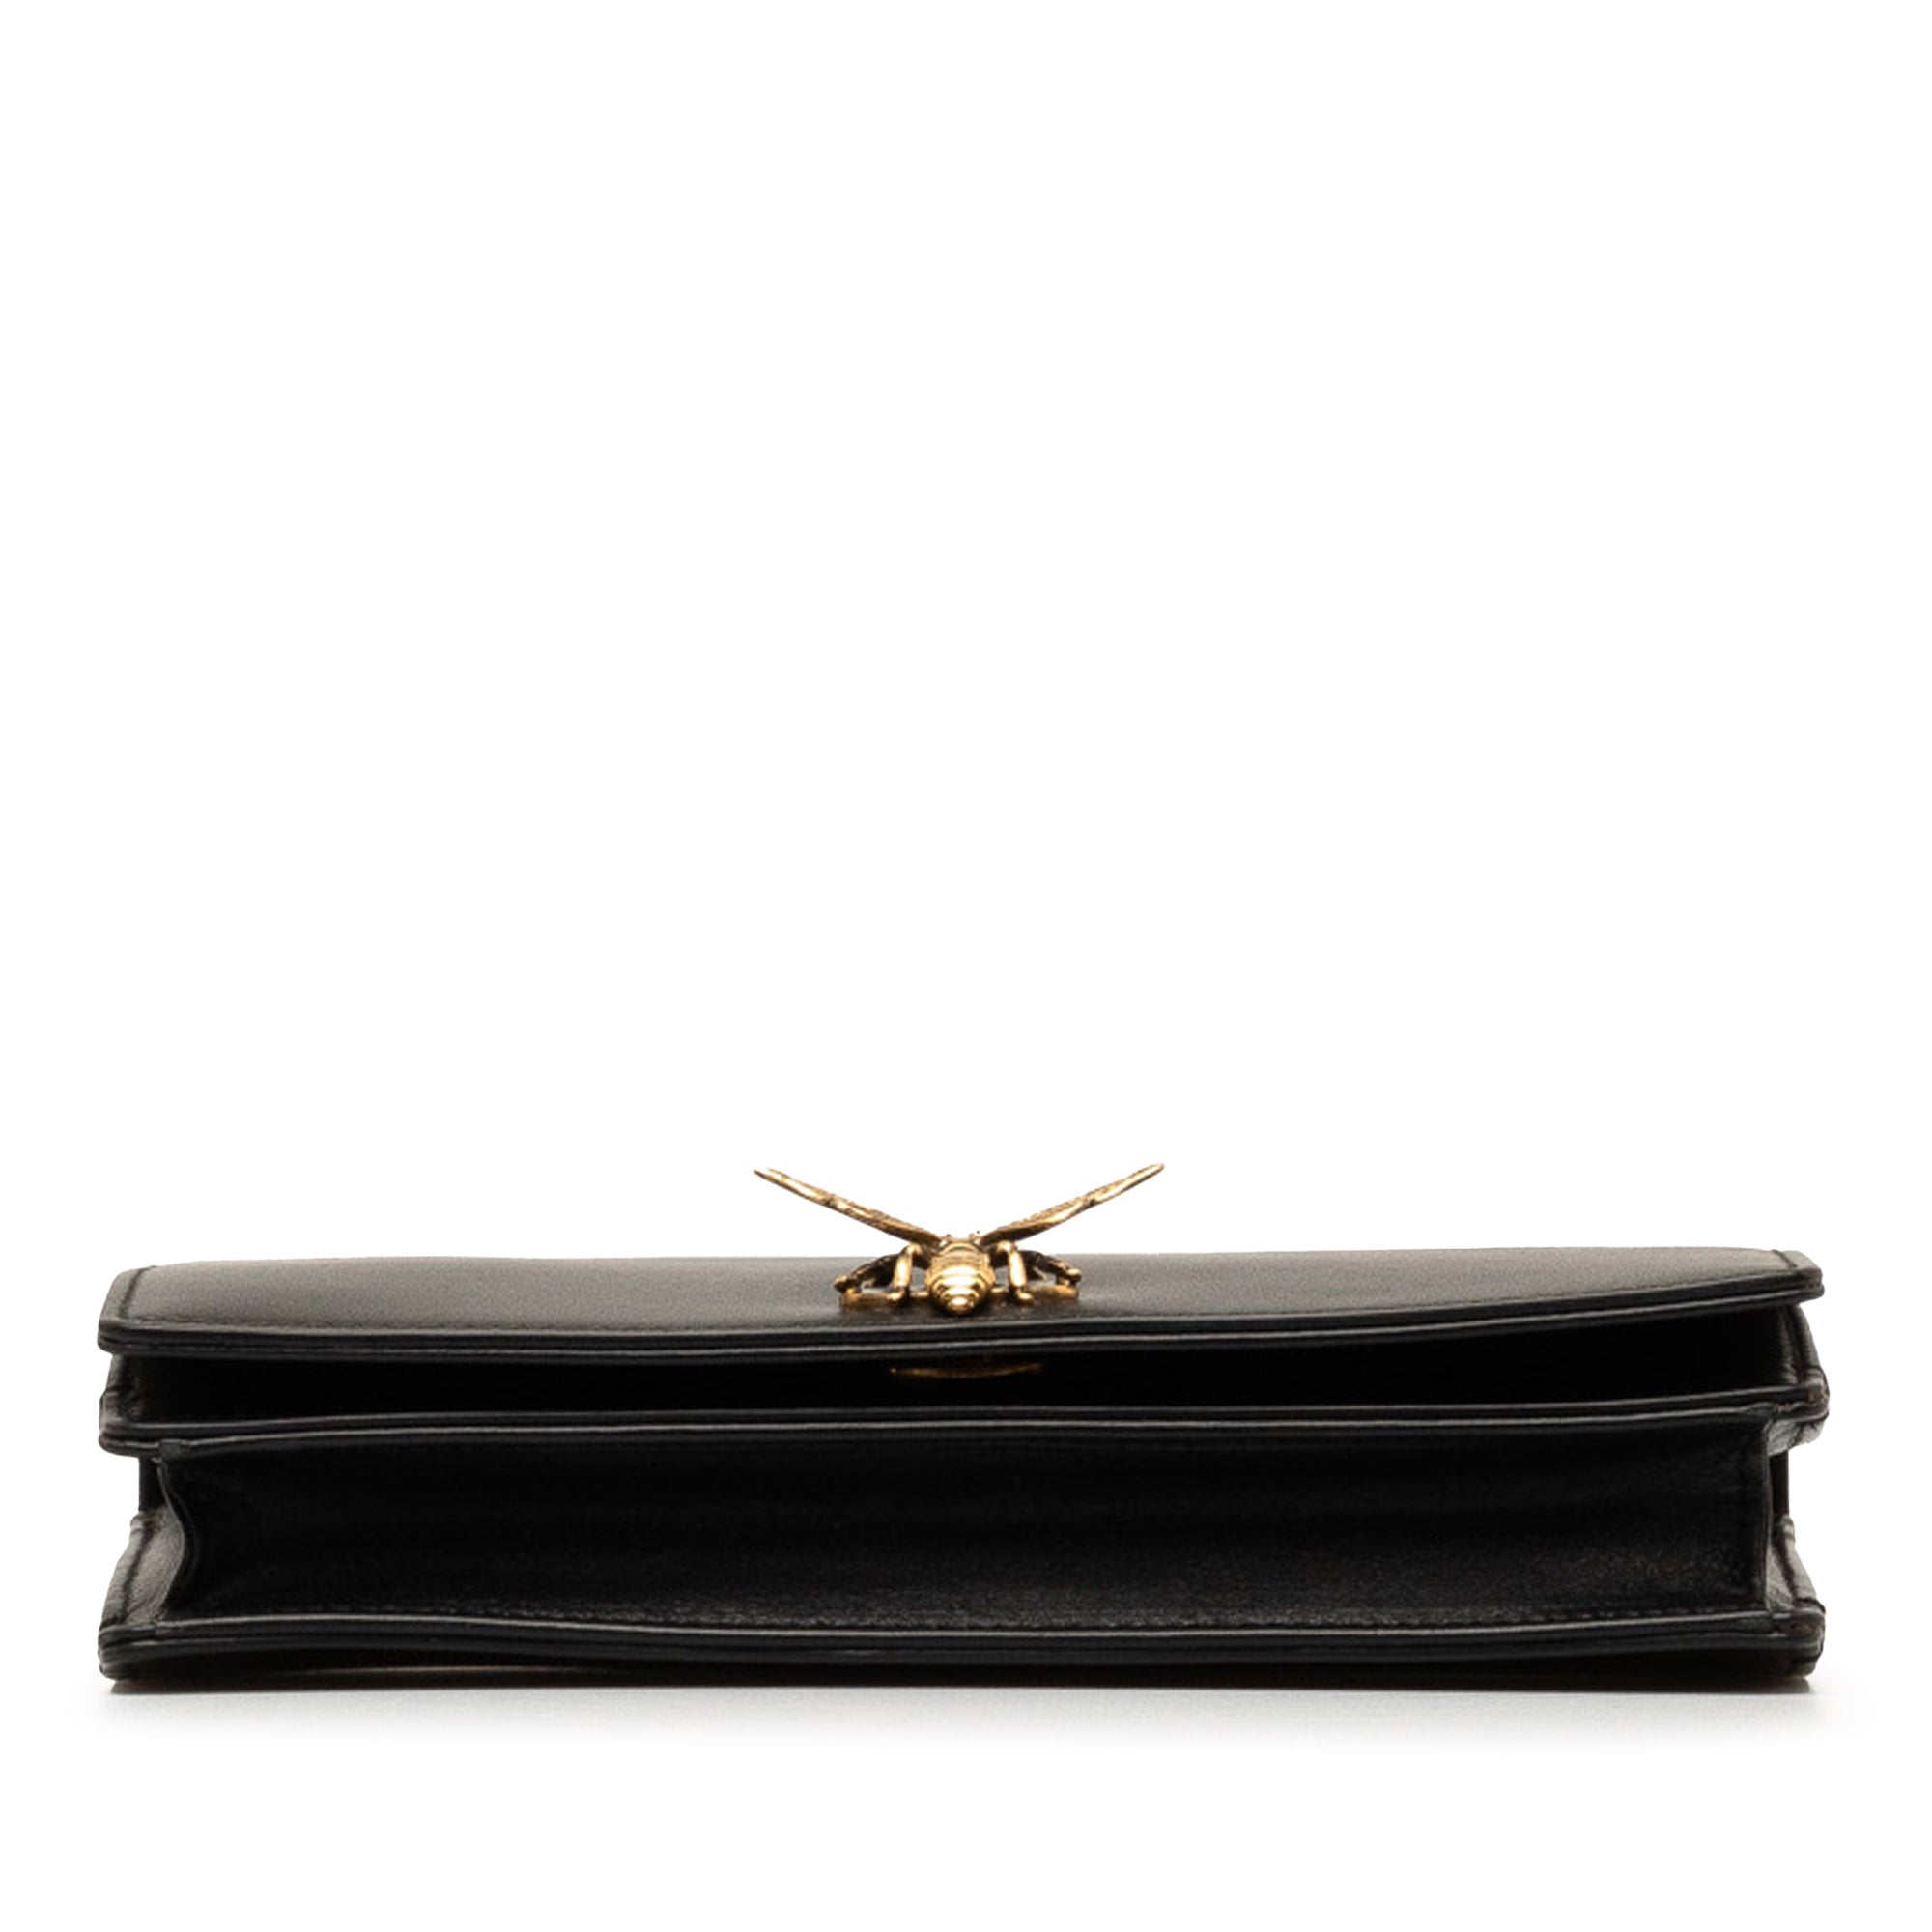 Gucci Black Leather Bee Clutch